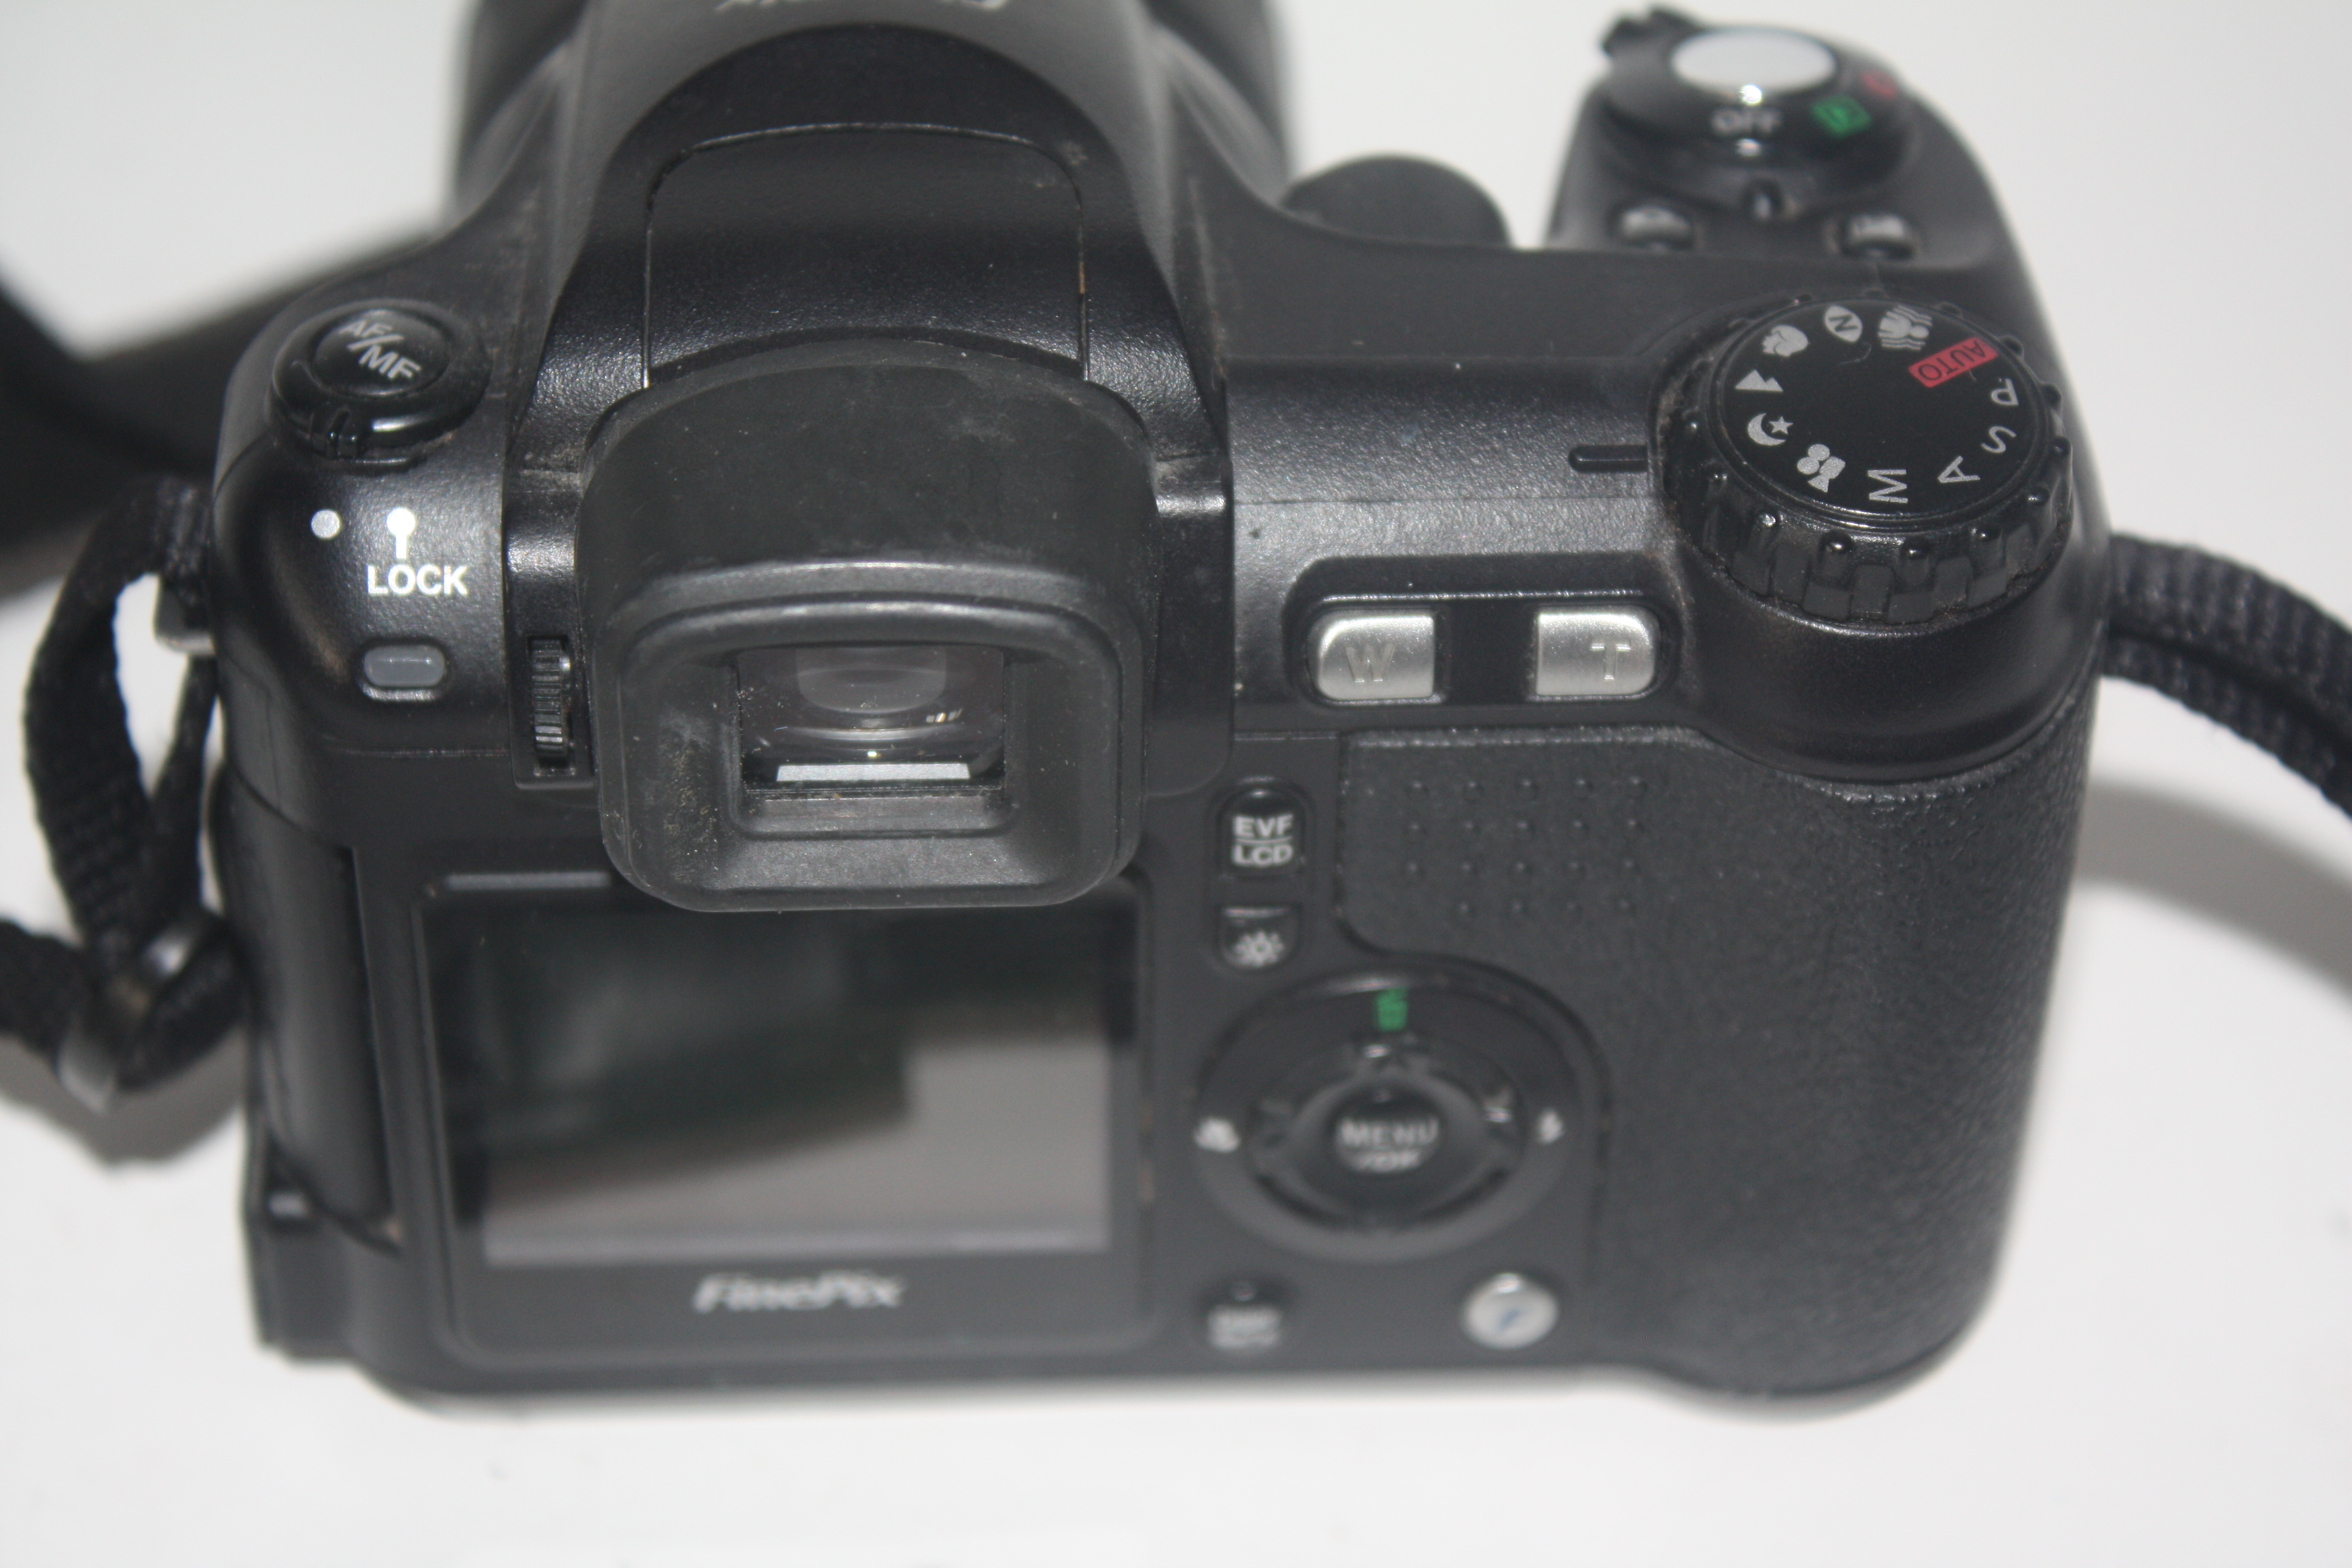 Canon 350 D body together with a Fujifilm S5200 and a Minolta Dimage - Bild 7 aus 7